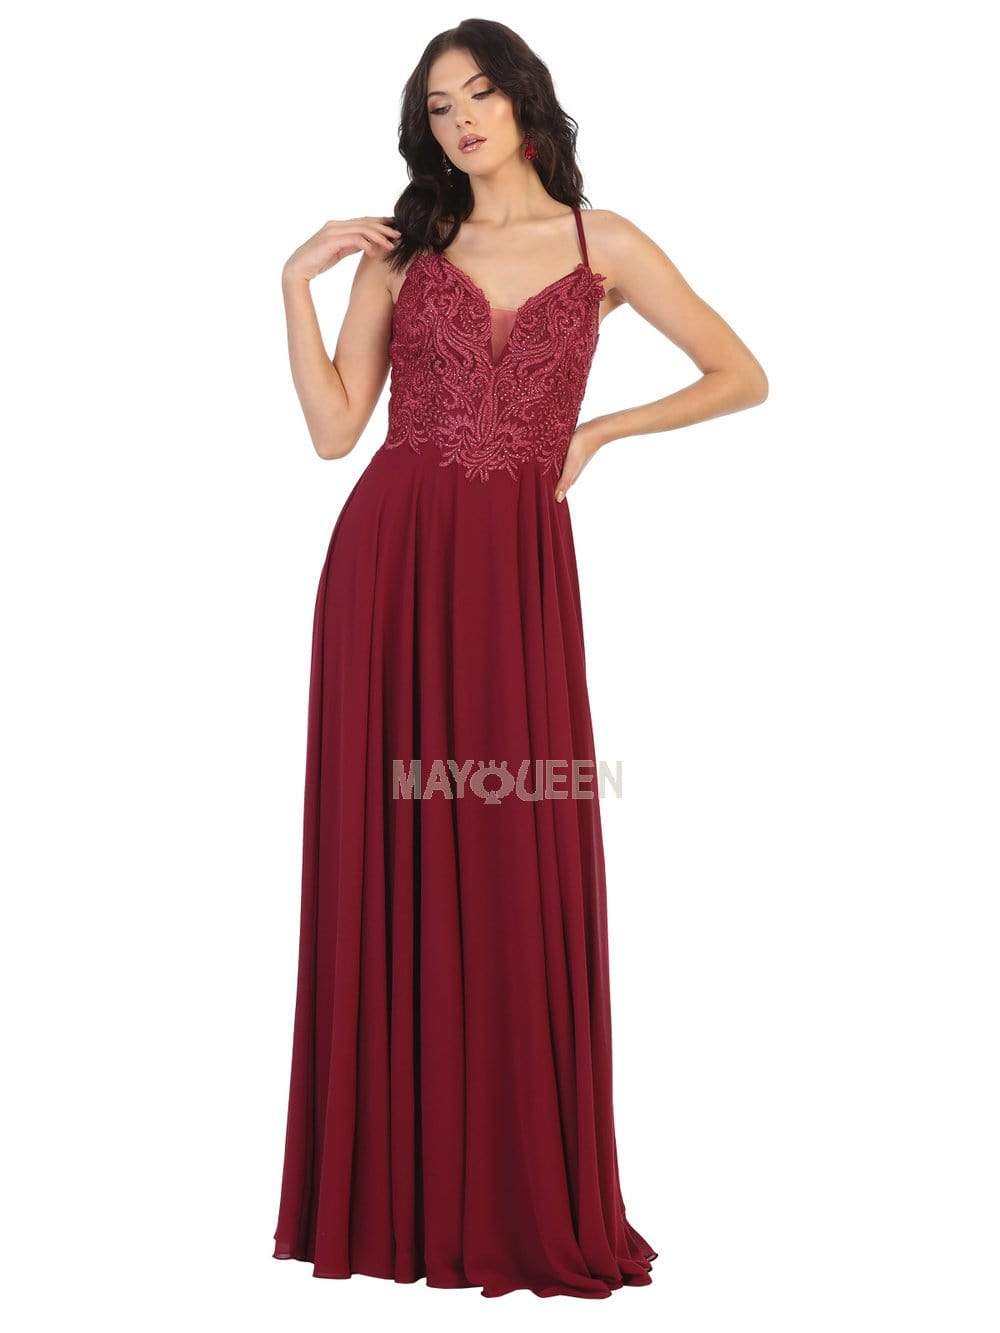 May Queen - MQ1750 Embroidered Plunging V-neck A-line Dress
